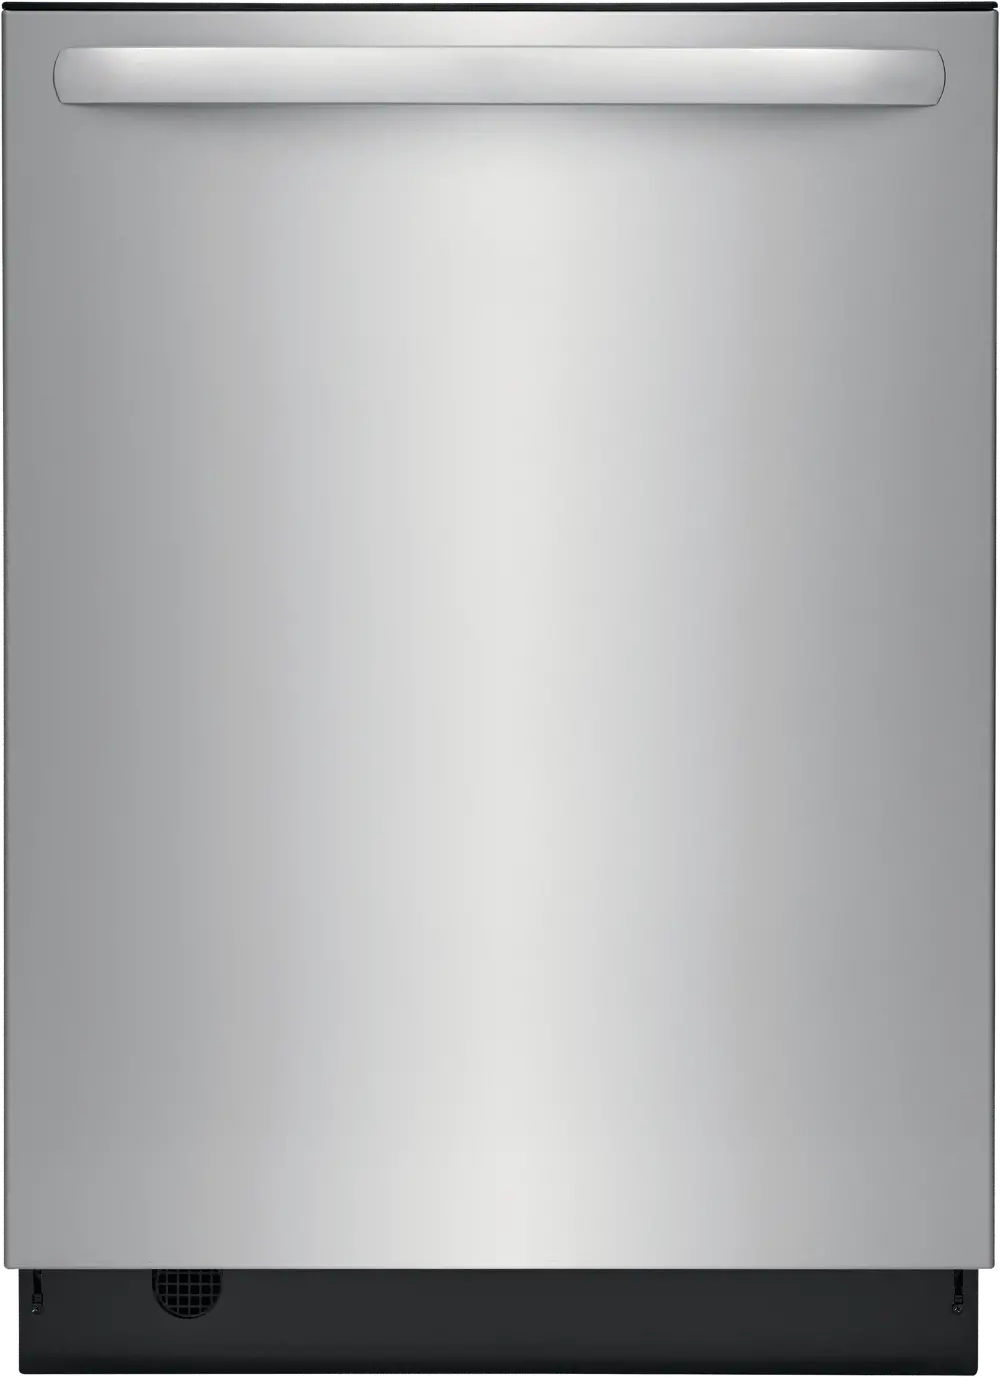 FDSH4501AS Frigidaire Top Control Dishwasher - Stainless Steel-1